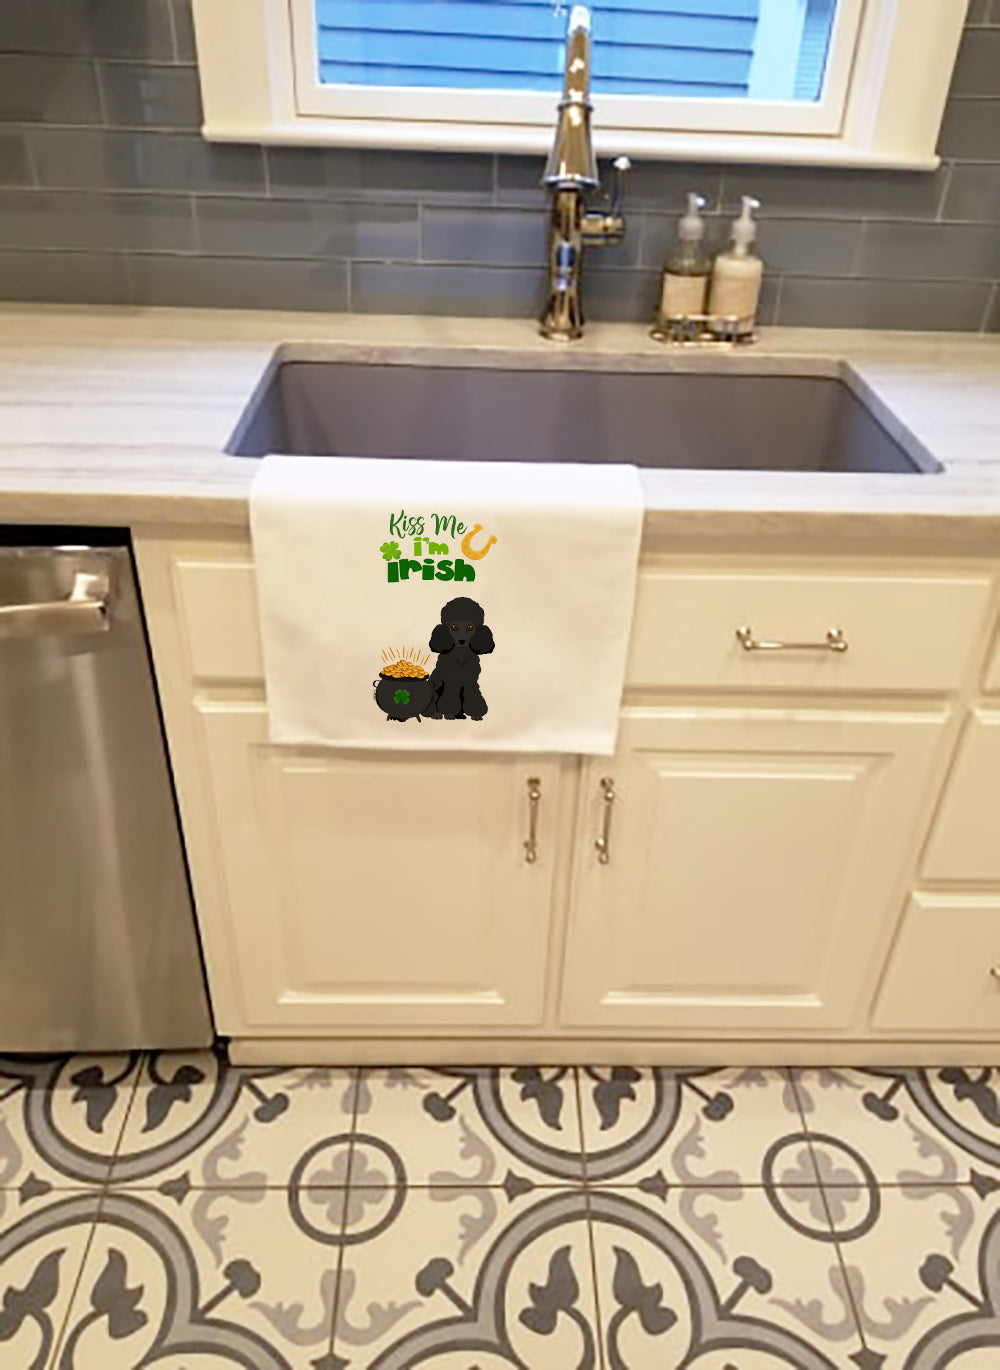 Buy this Toy Black Poodle St. Patrick's Day White Kitchen Towel Set of 2 Dish Towels